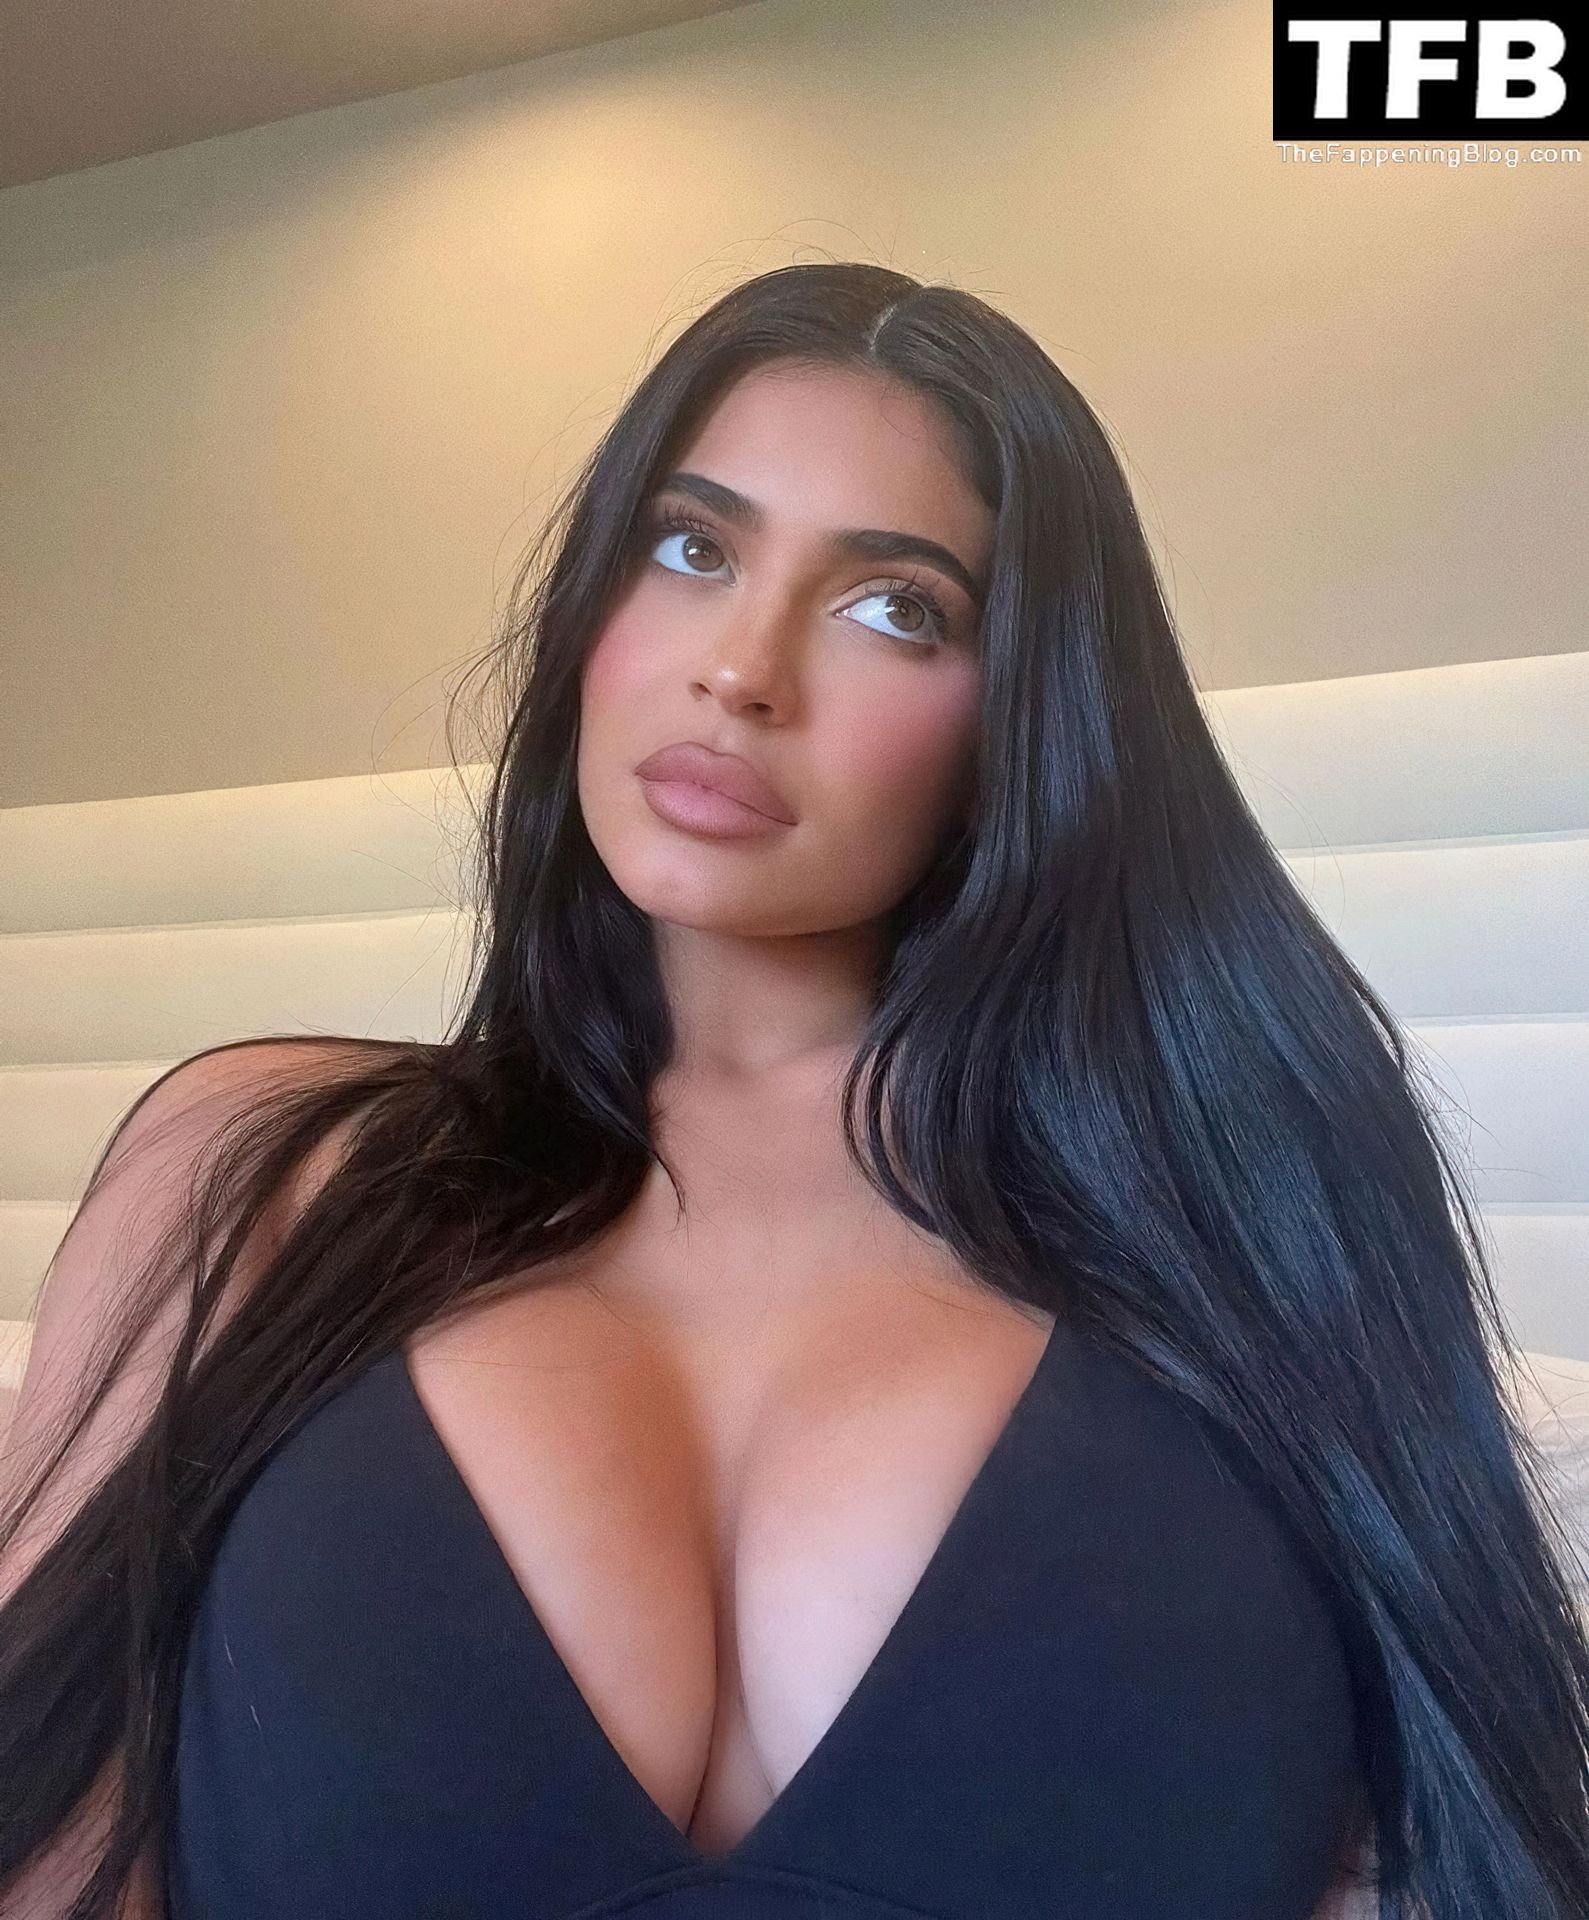 Kylie Jenner Shows Off Her Big Tits (2 Photos)